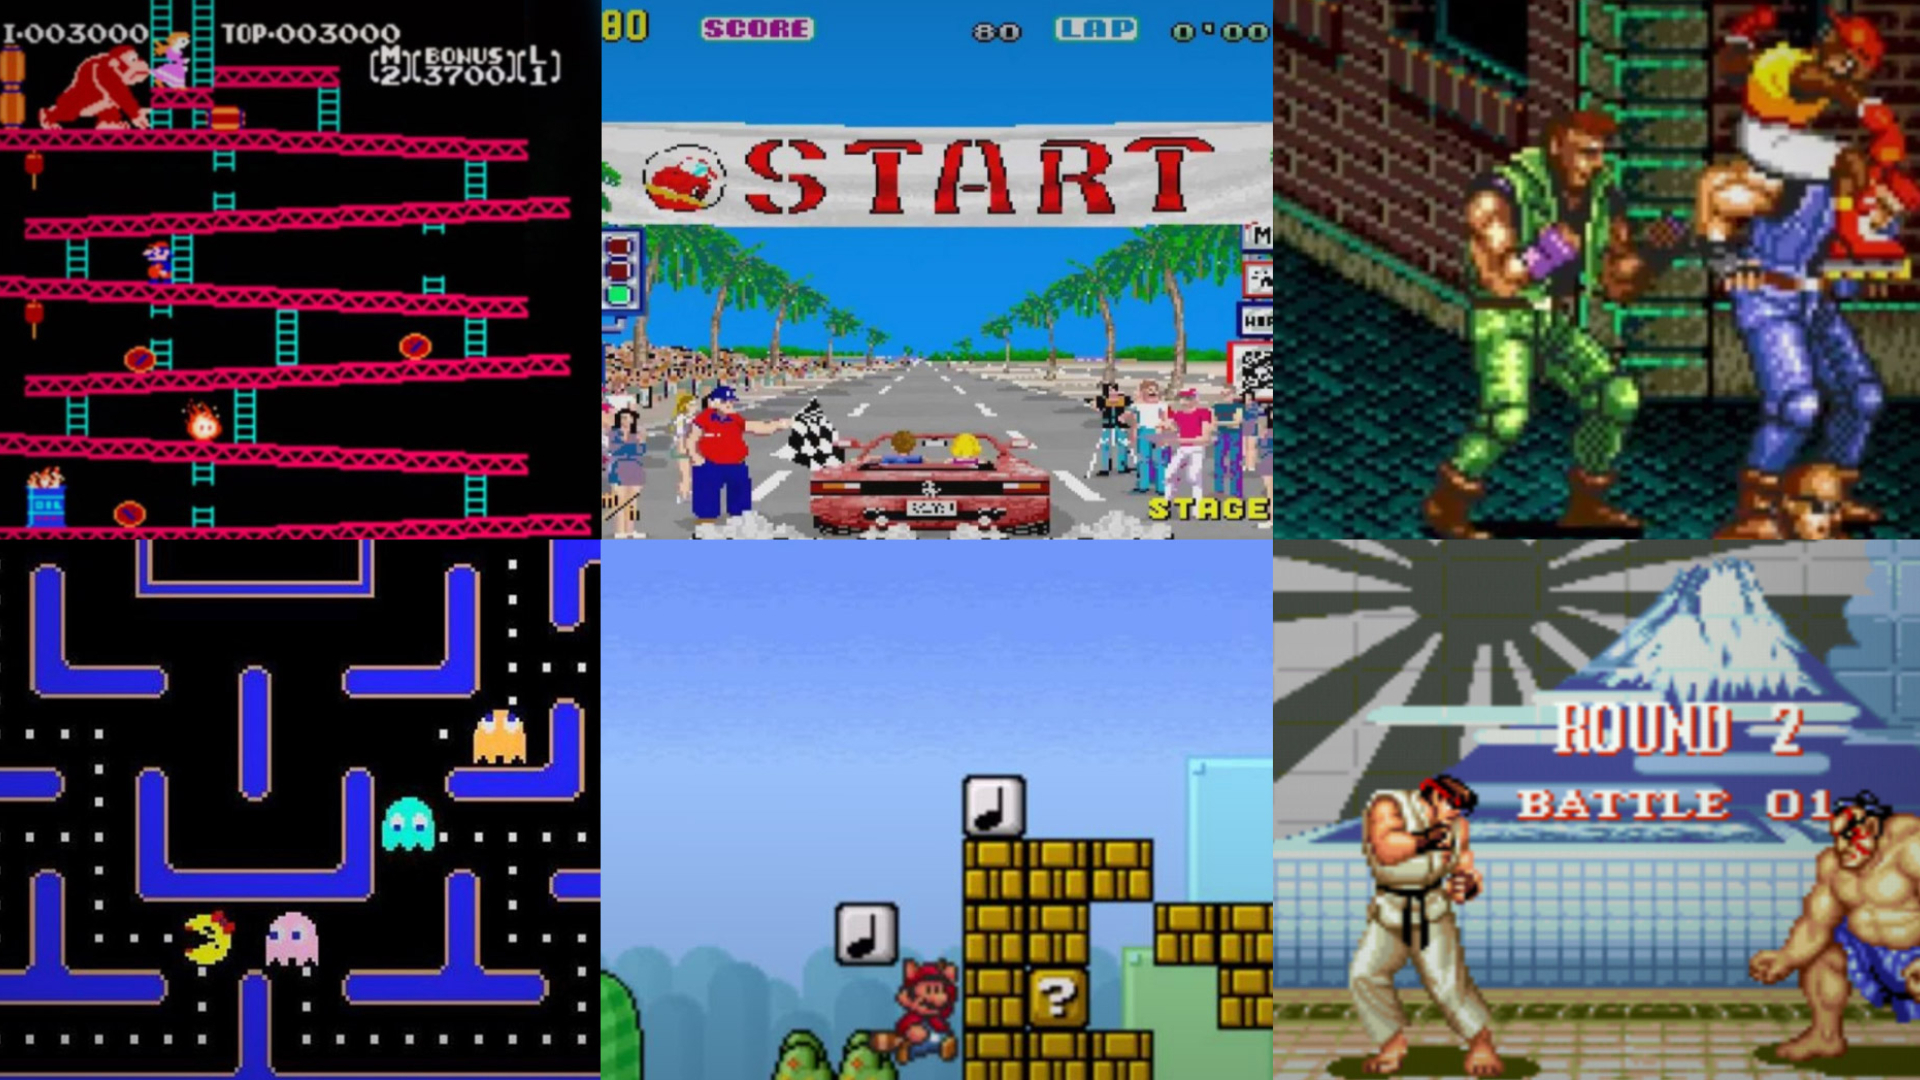 These beloved retro video games are making a comeback